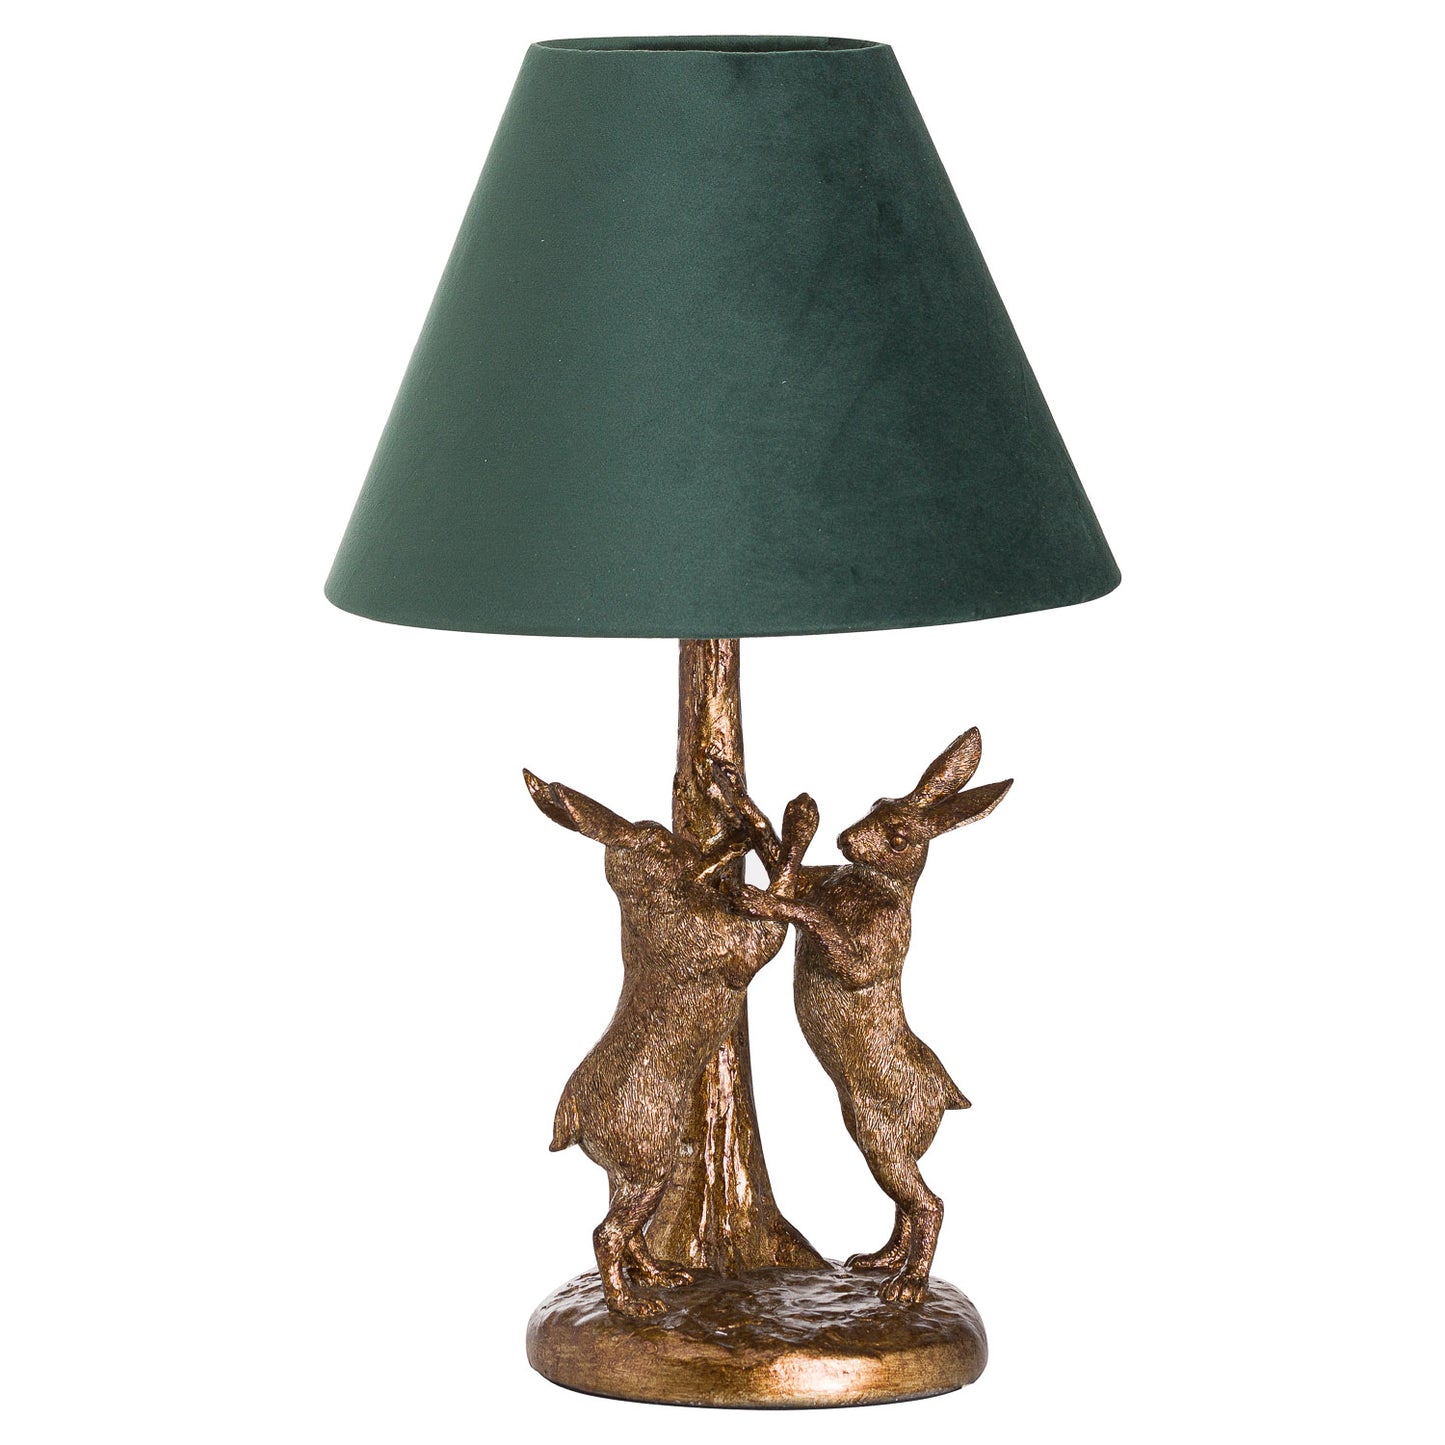 Gold Playful Hares Table Lamp with Green Velvet Shade